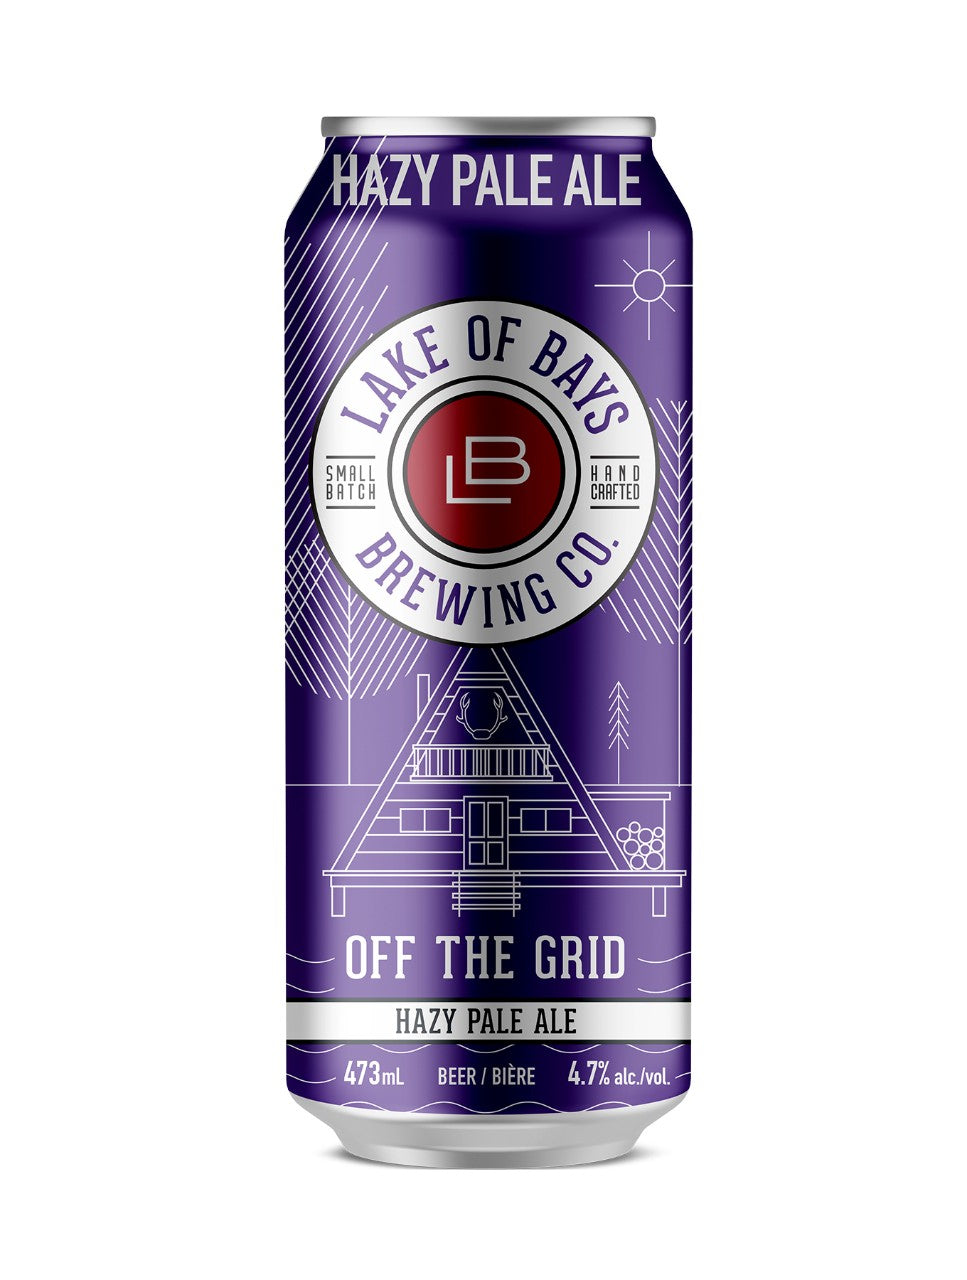 Lake of Bays Off the Grid Hazy Pale Ale 473 mL can